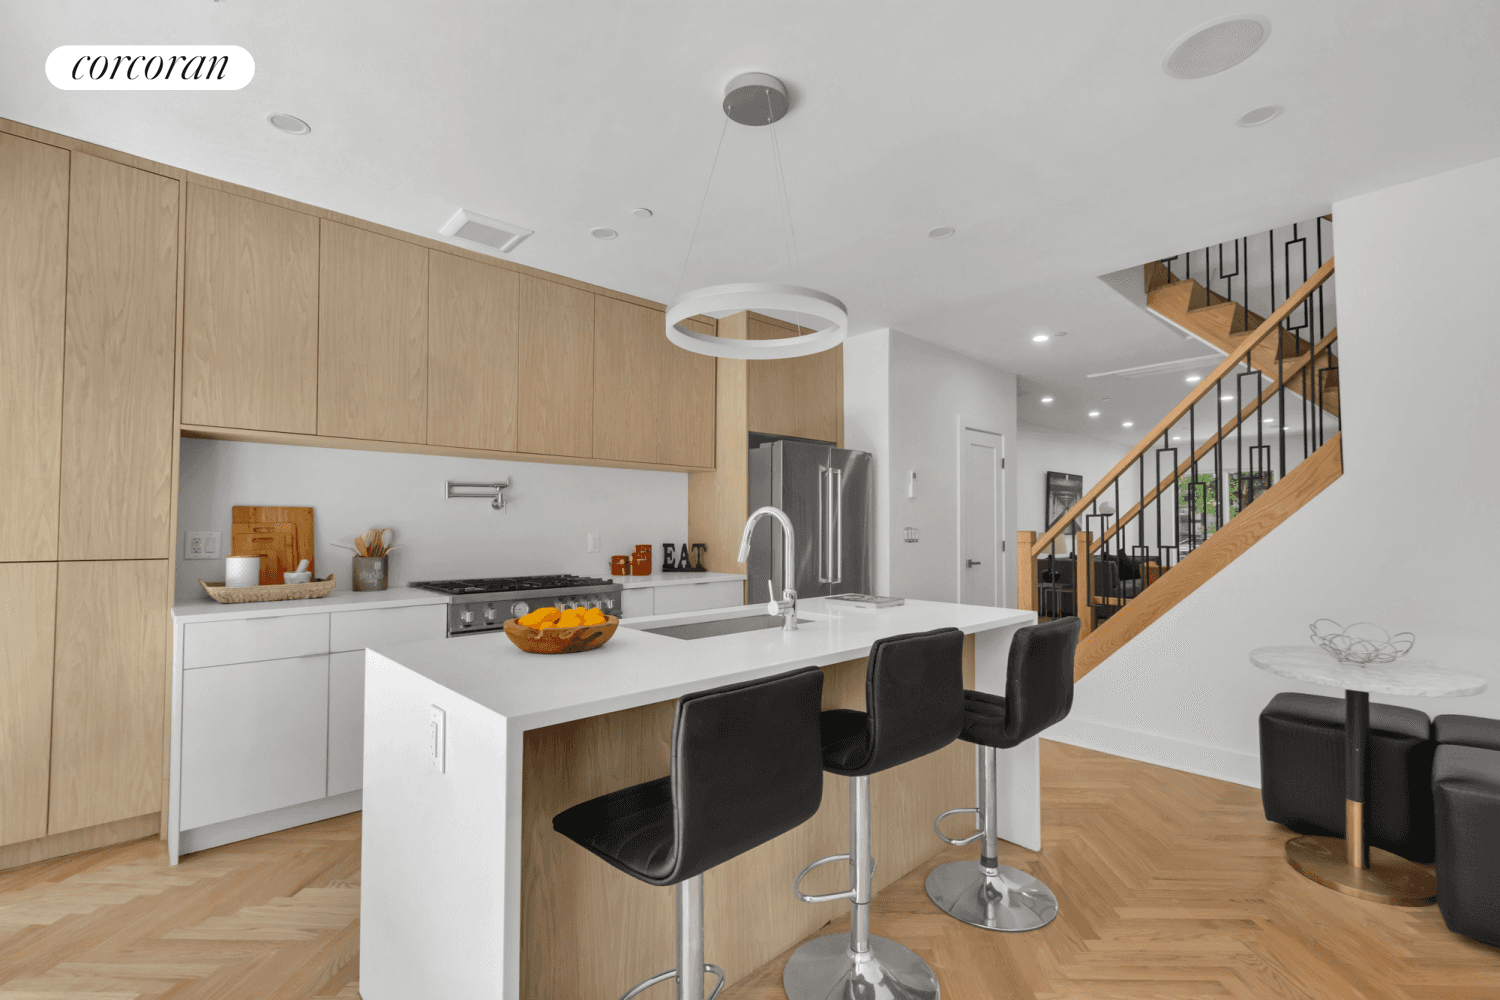 Welcome home to 711 6th Avenue ; a gut renovated, developer finished single family townhouse sitting on a quiet, tree lined street right on the dreamy border of Park Slope ...